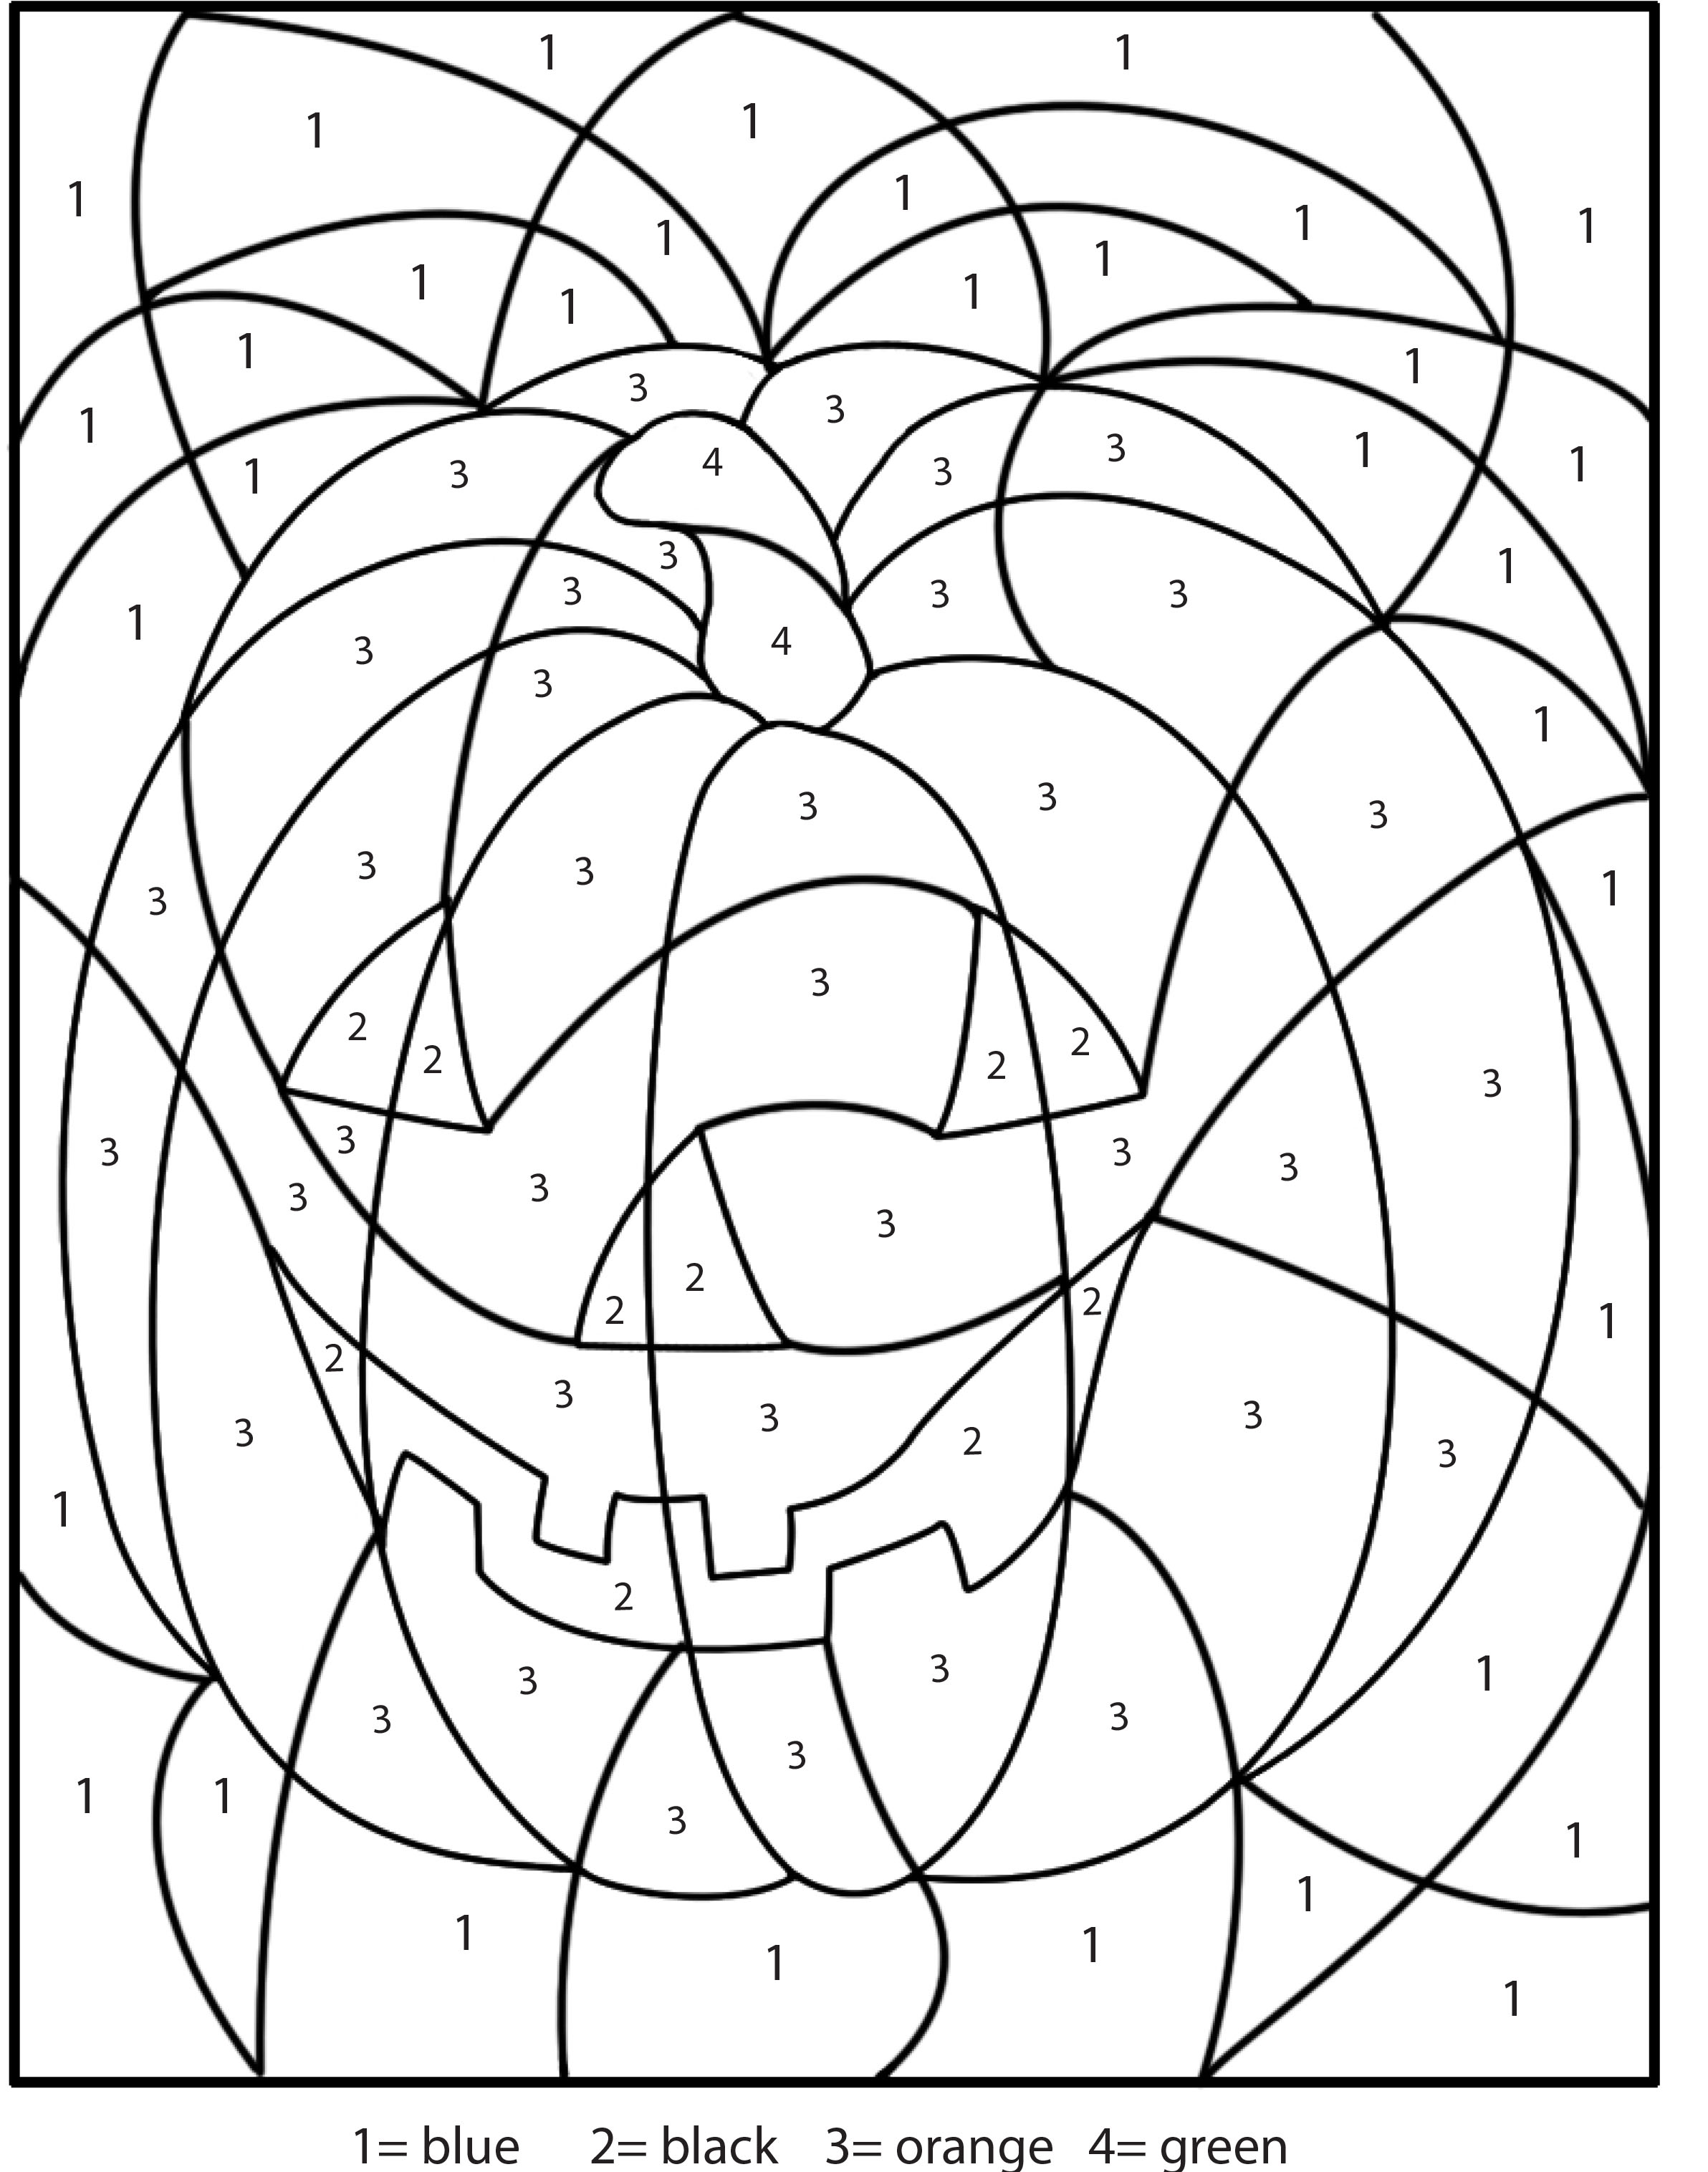 Coloring By Number Halloween New Coloring Pages Creeper Coloring Page ...